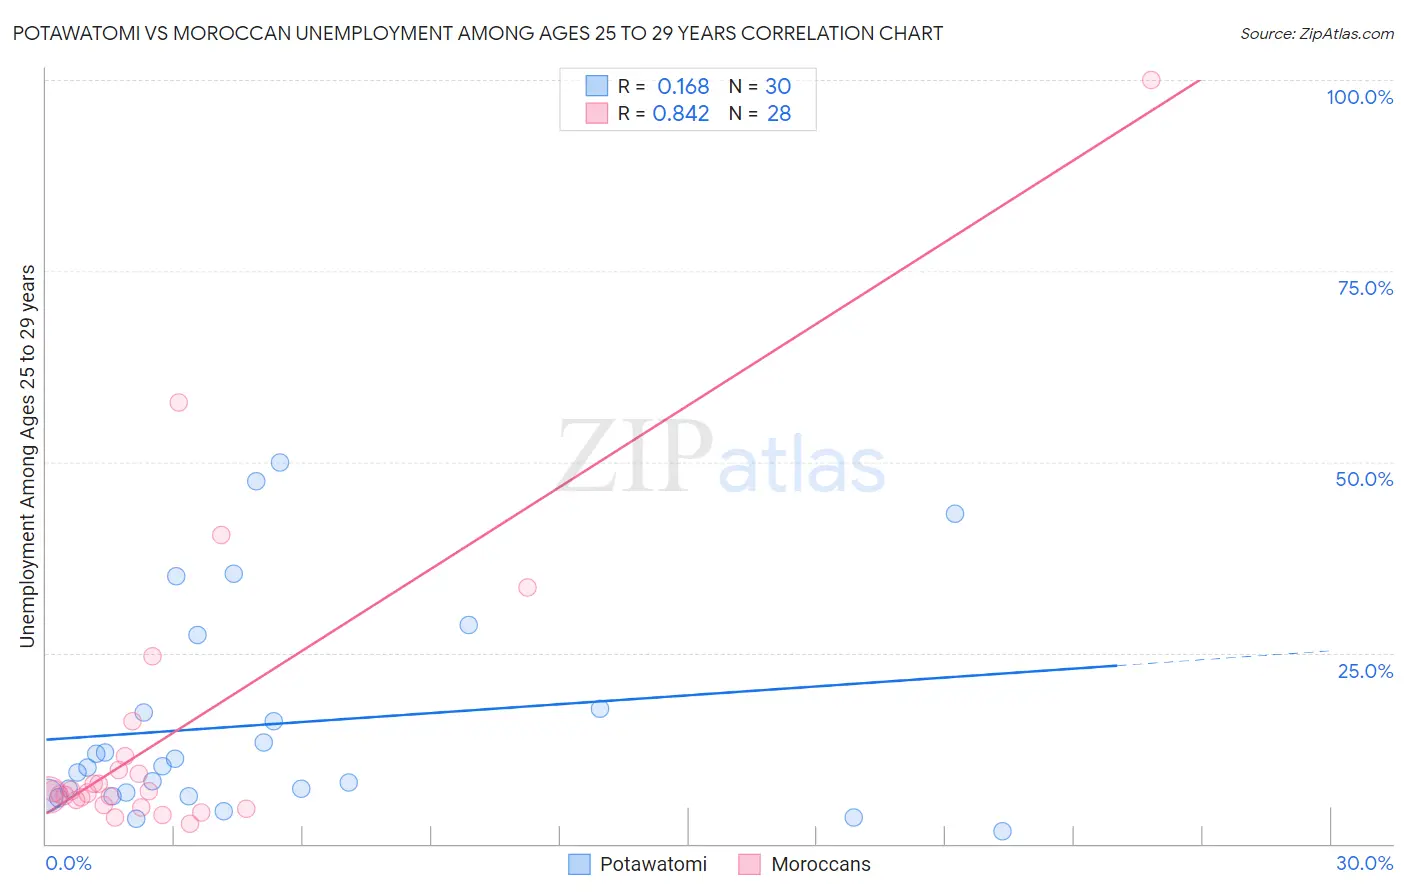 Potawatomi vs Moroccan Unemployment Among Ages 25 to 29 years